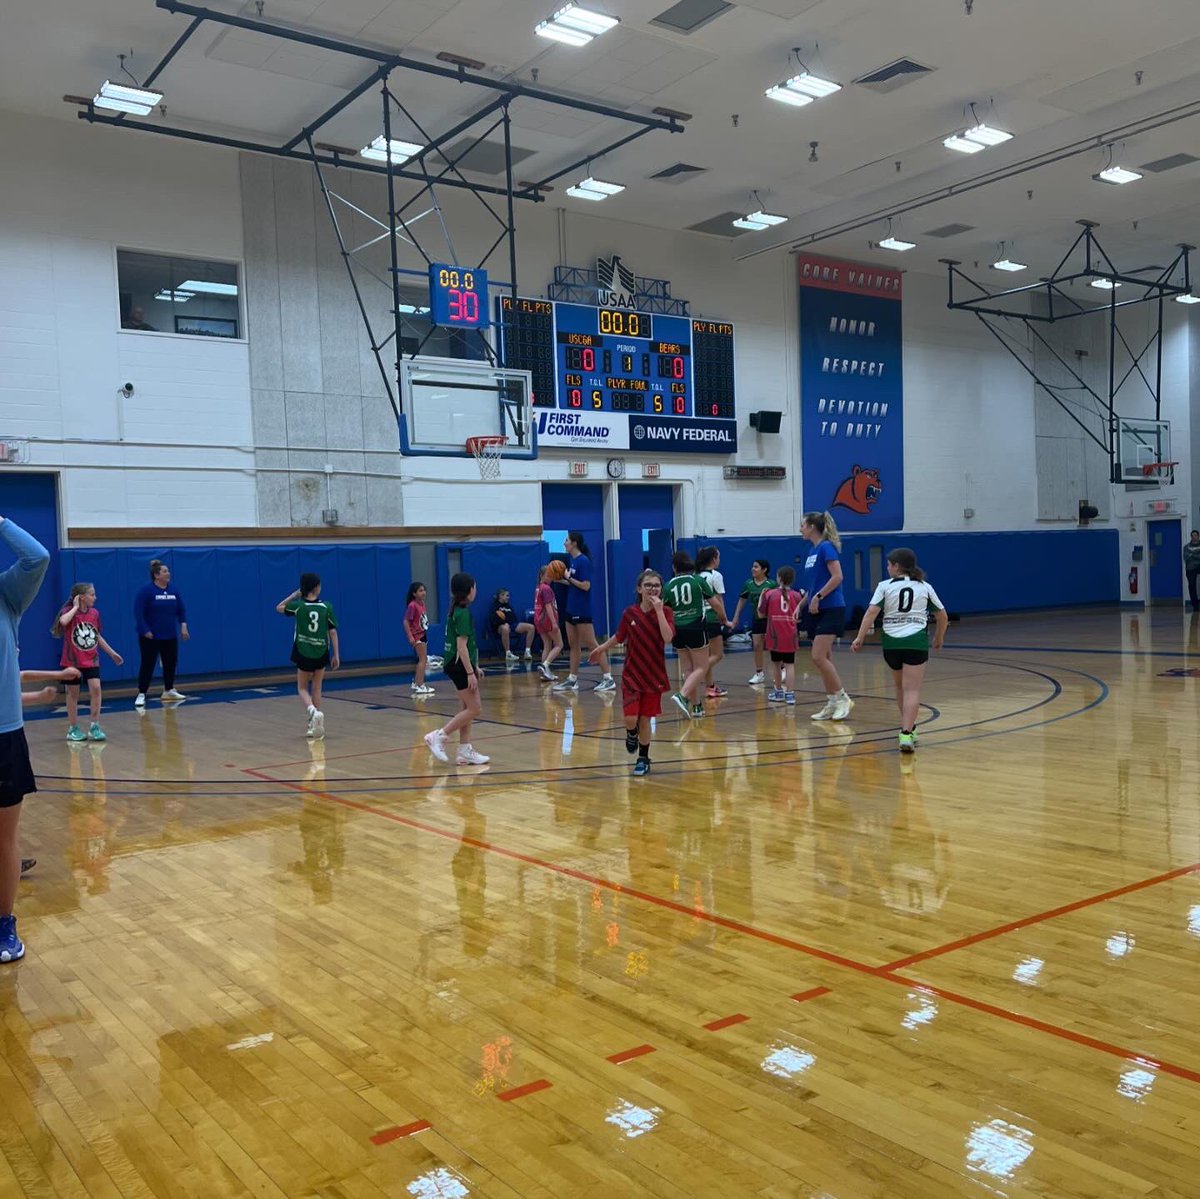 So much fun growing the game by helping these girls to improve their ball handling, shooting, and defense at a clinic last night! 🐻🏀
.
#gocoastguard #legacy #growthegame